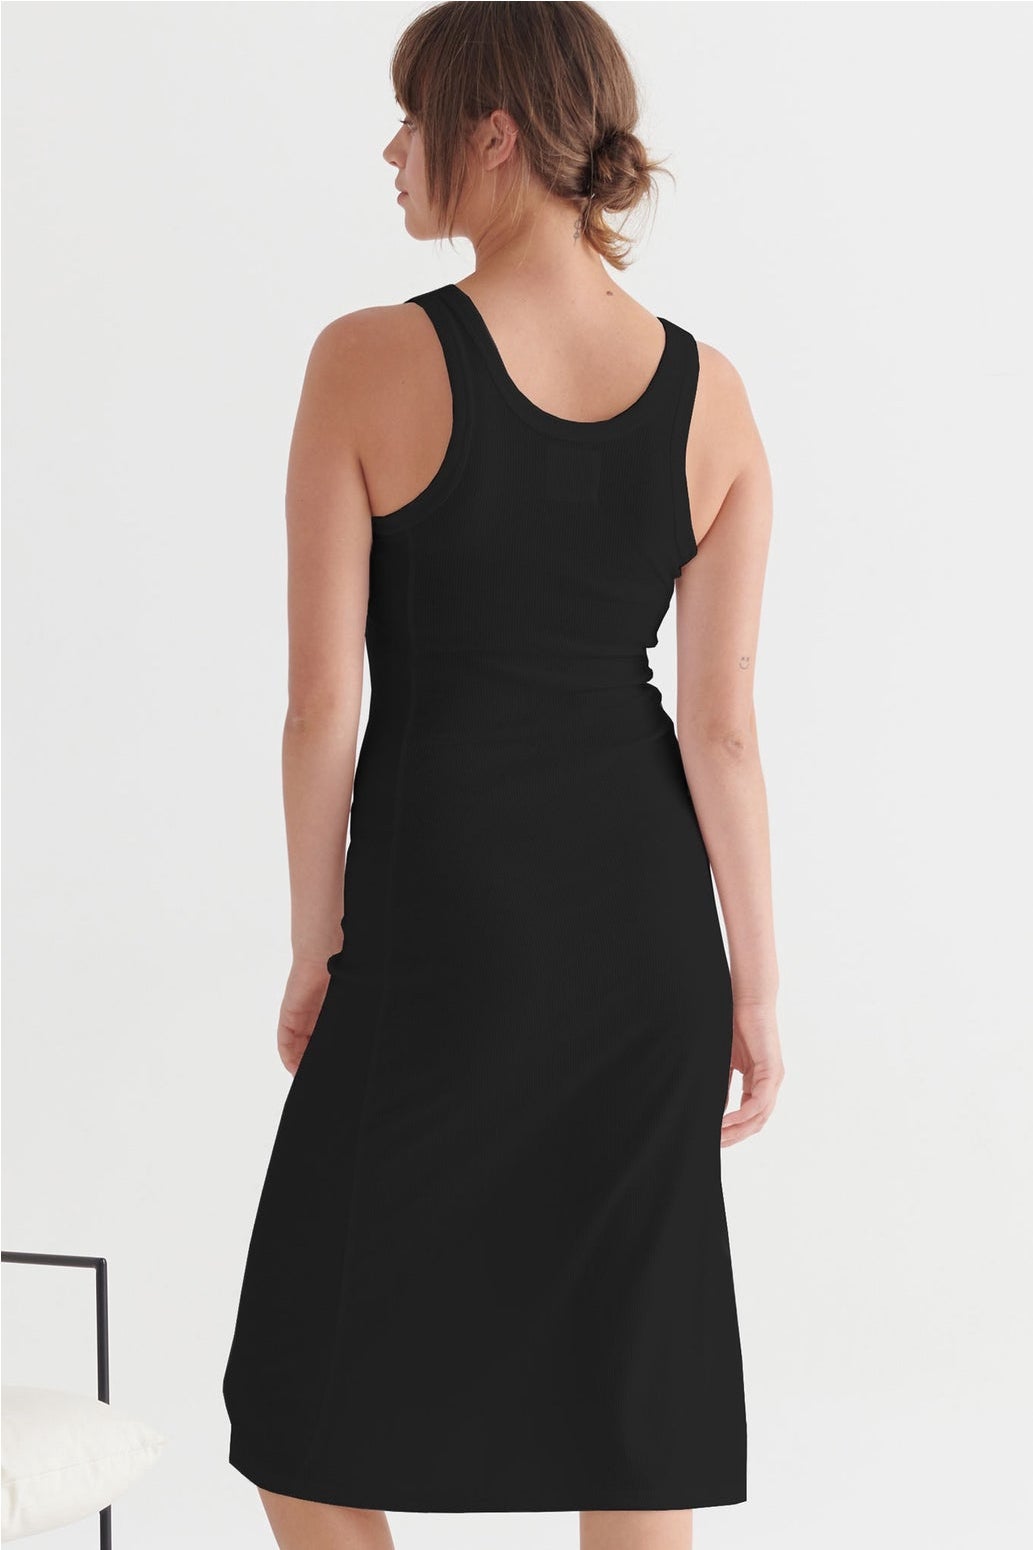 https://www.taylorboutique.co.nz/content/products/Evident-Tank-Dress-Black-2.jpeg?canvas=2:3&width=1088